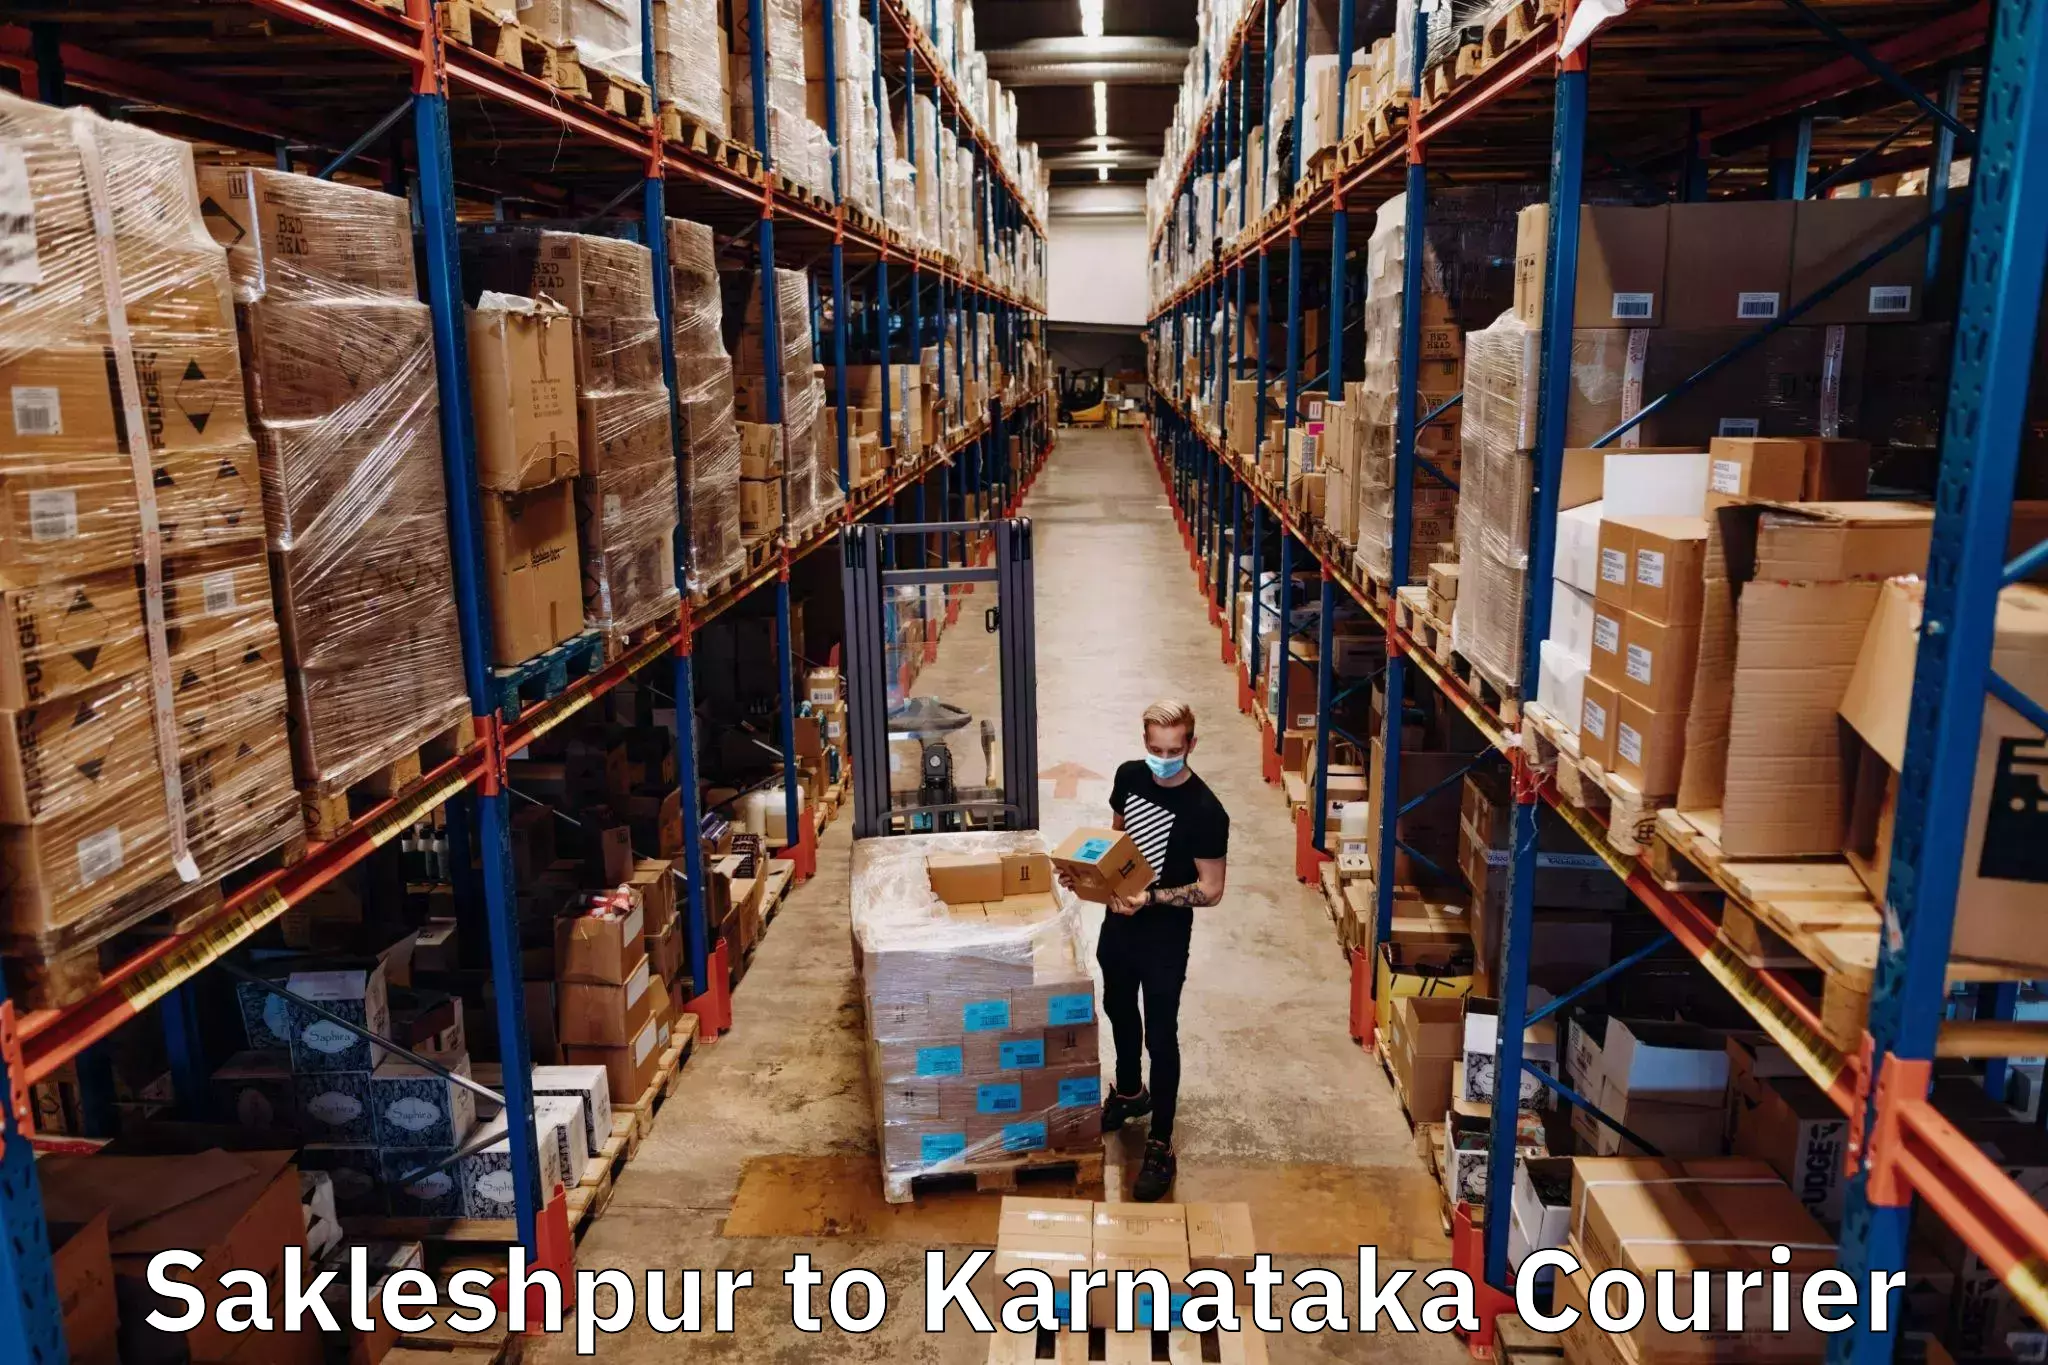 Reliable courier service Sakleshpur to Manipal